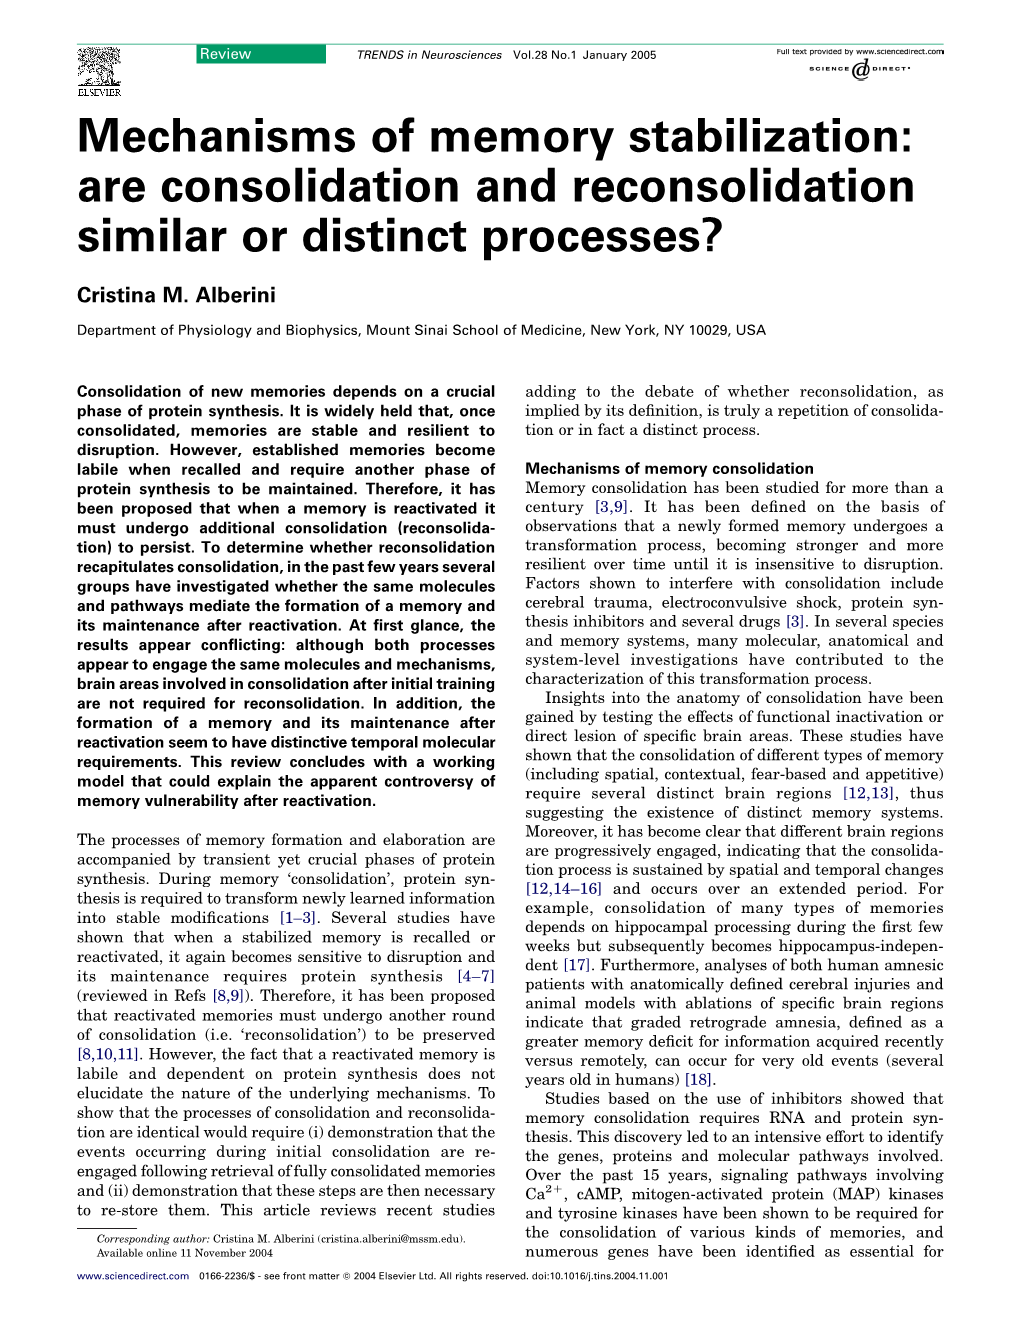 Mechanisms of Memory Stabilization: Are Consolidation and Reconsolidation Similar Or Distinct Processes?